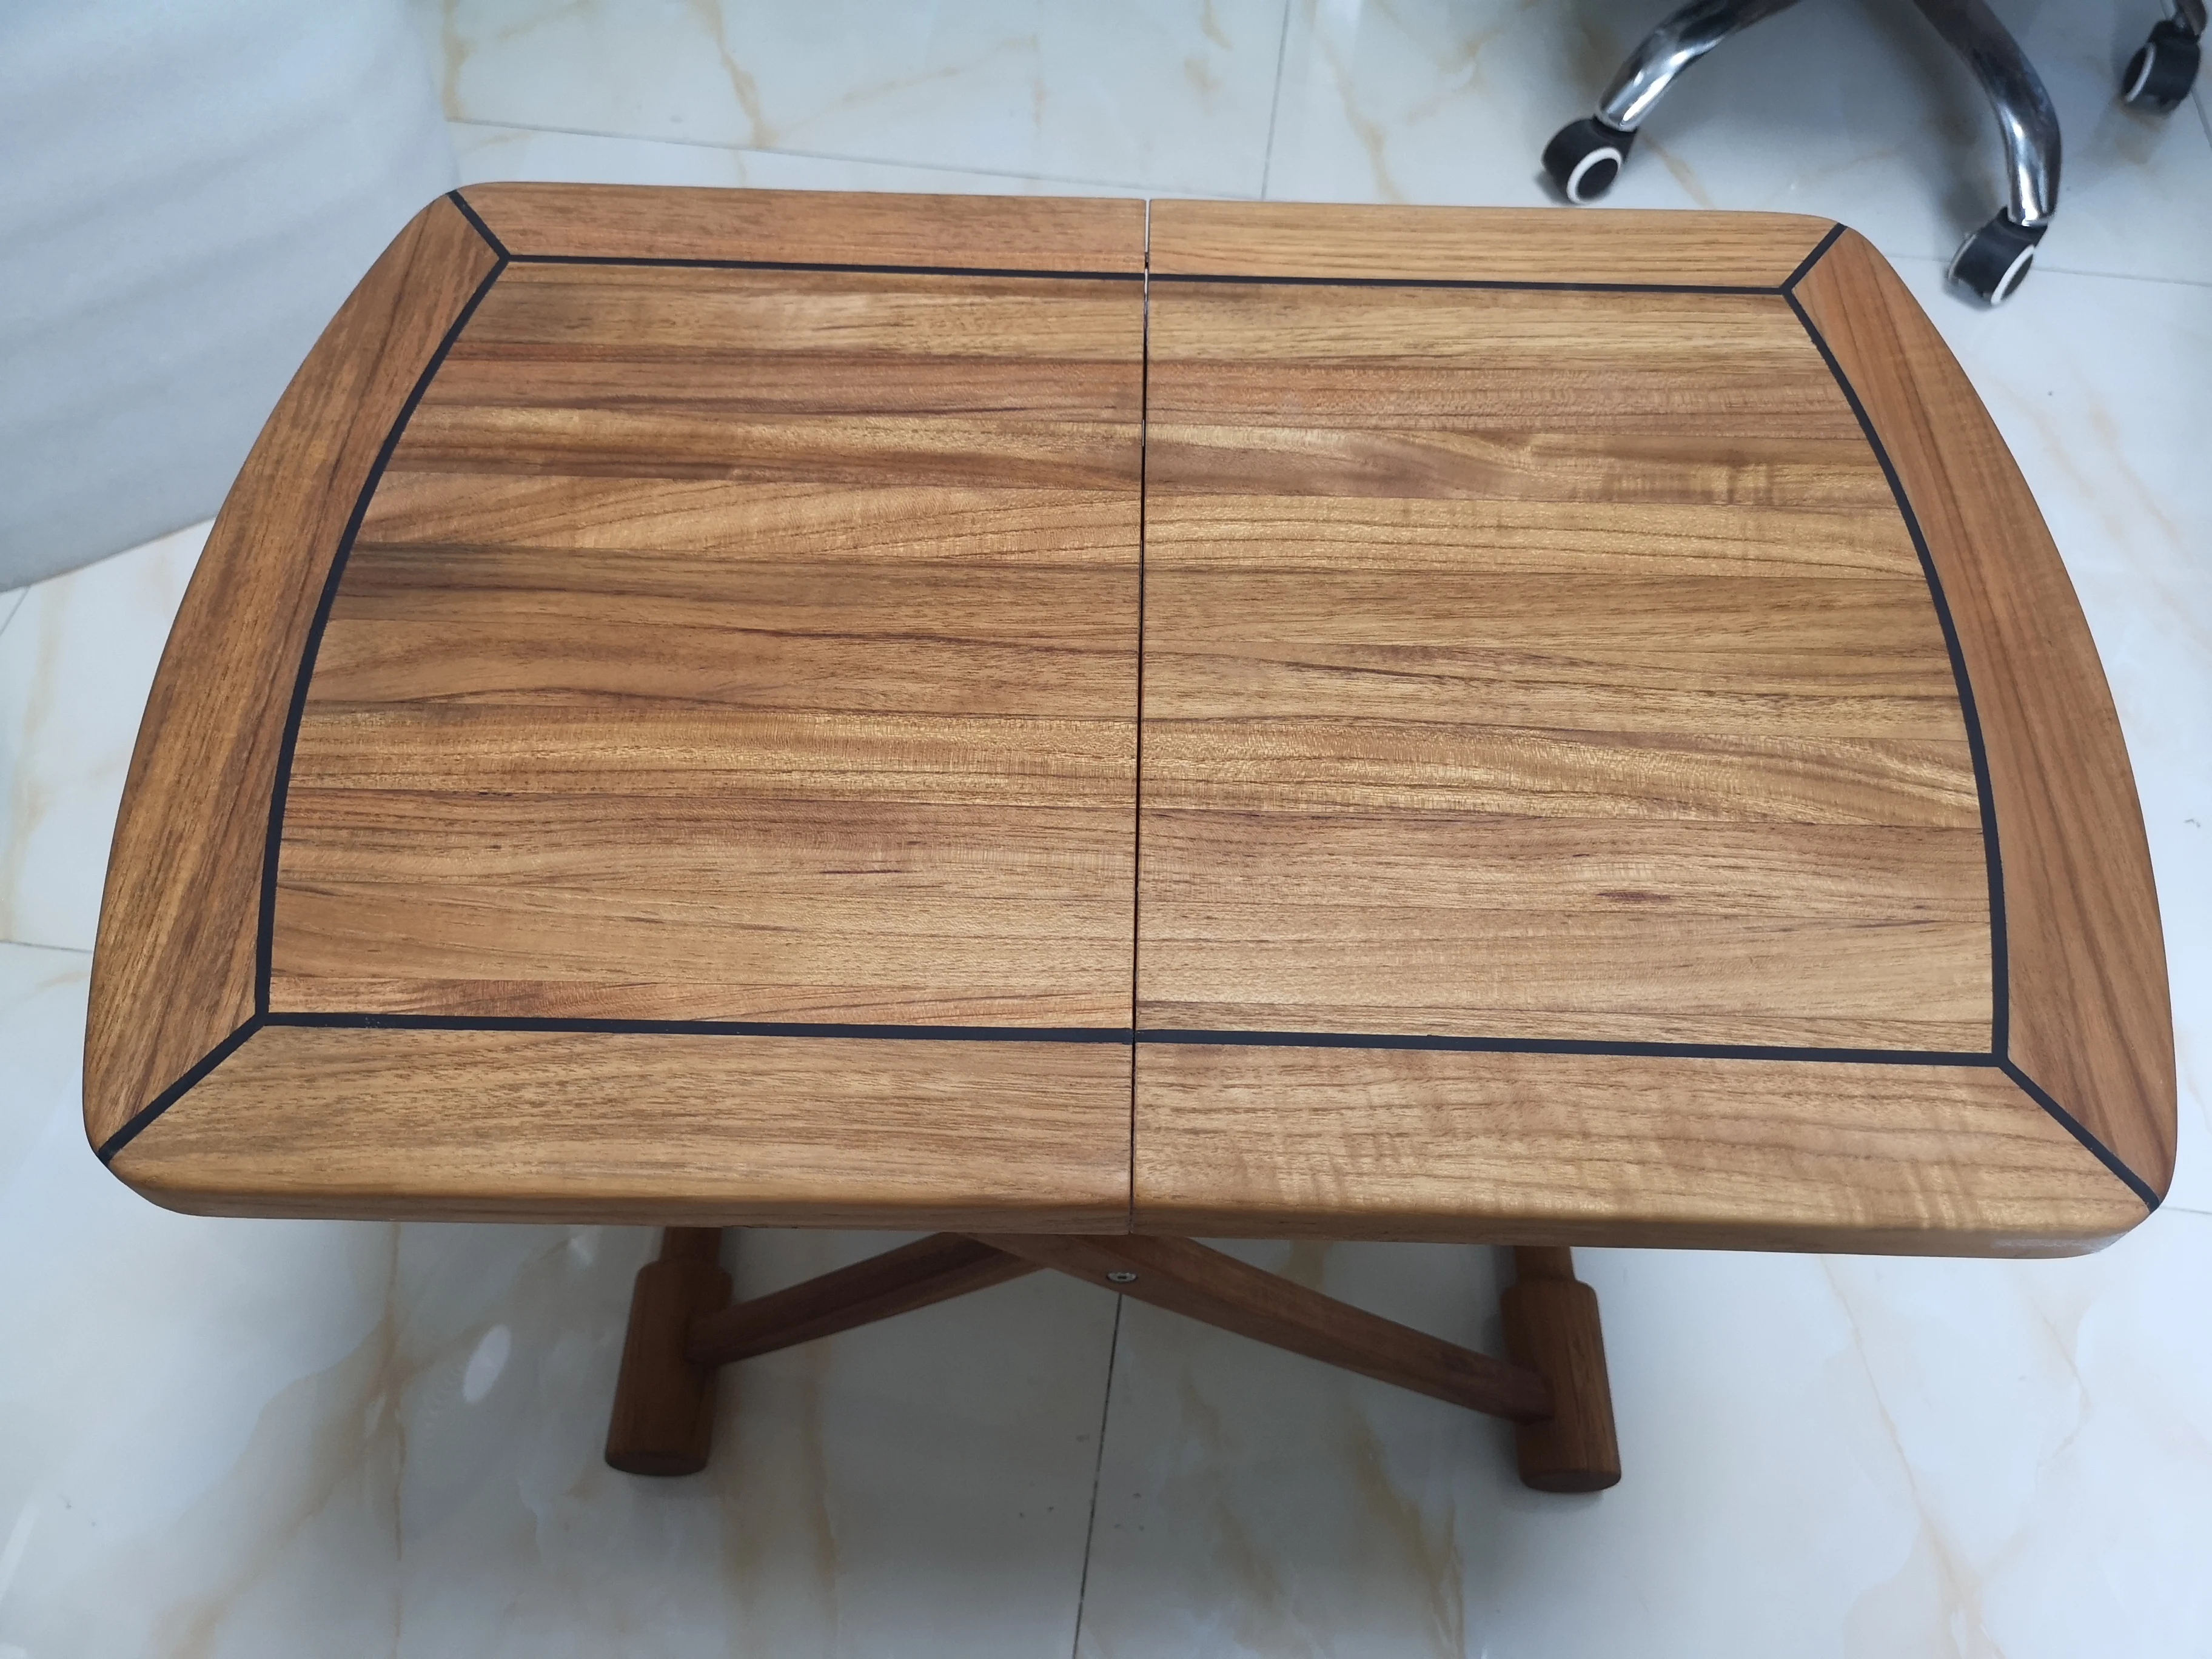 Teak Captain's Folding Table End-table Side Table 23.6x15.7 inch 600x400mm Marine Boat Yacht RV TMTF060T15 enlarge